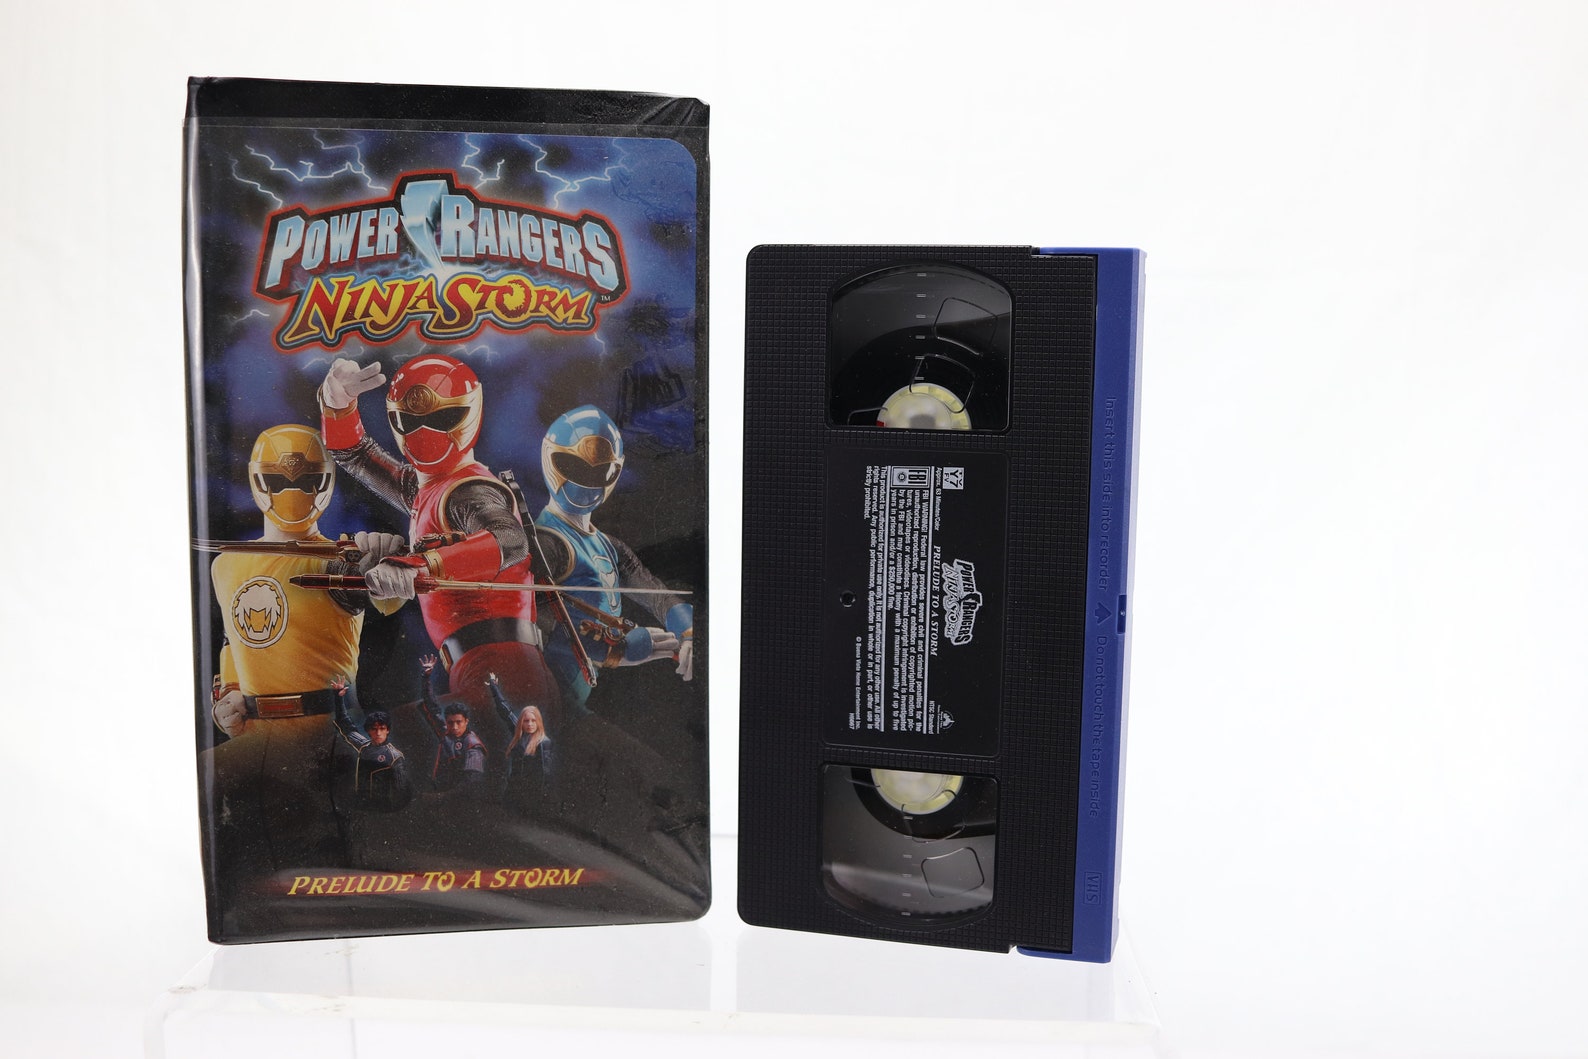 Power Rangers Ninja Storm Prelude to a Storm VHS | Etsy